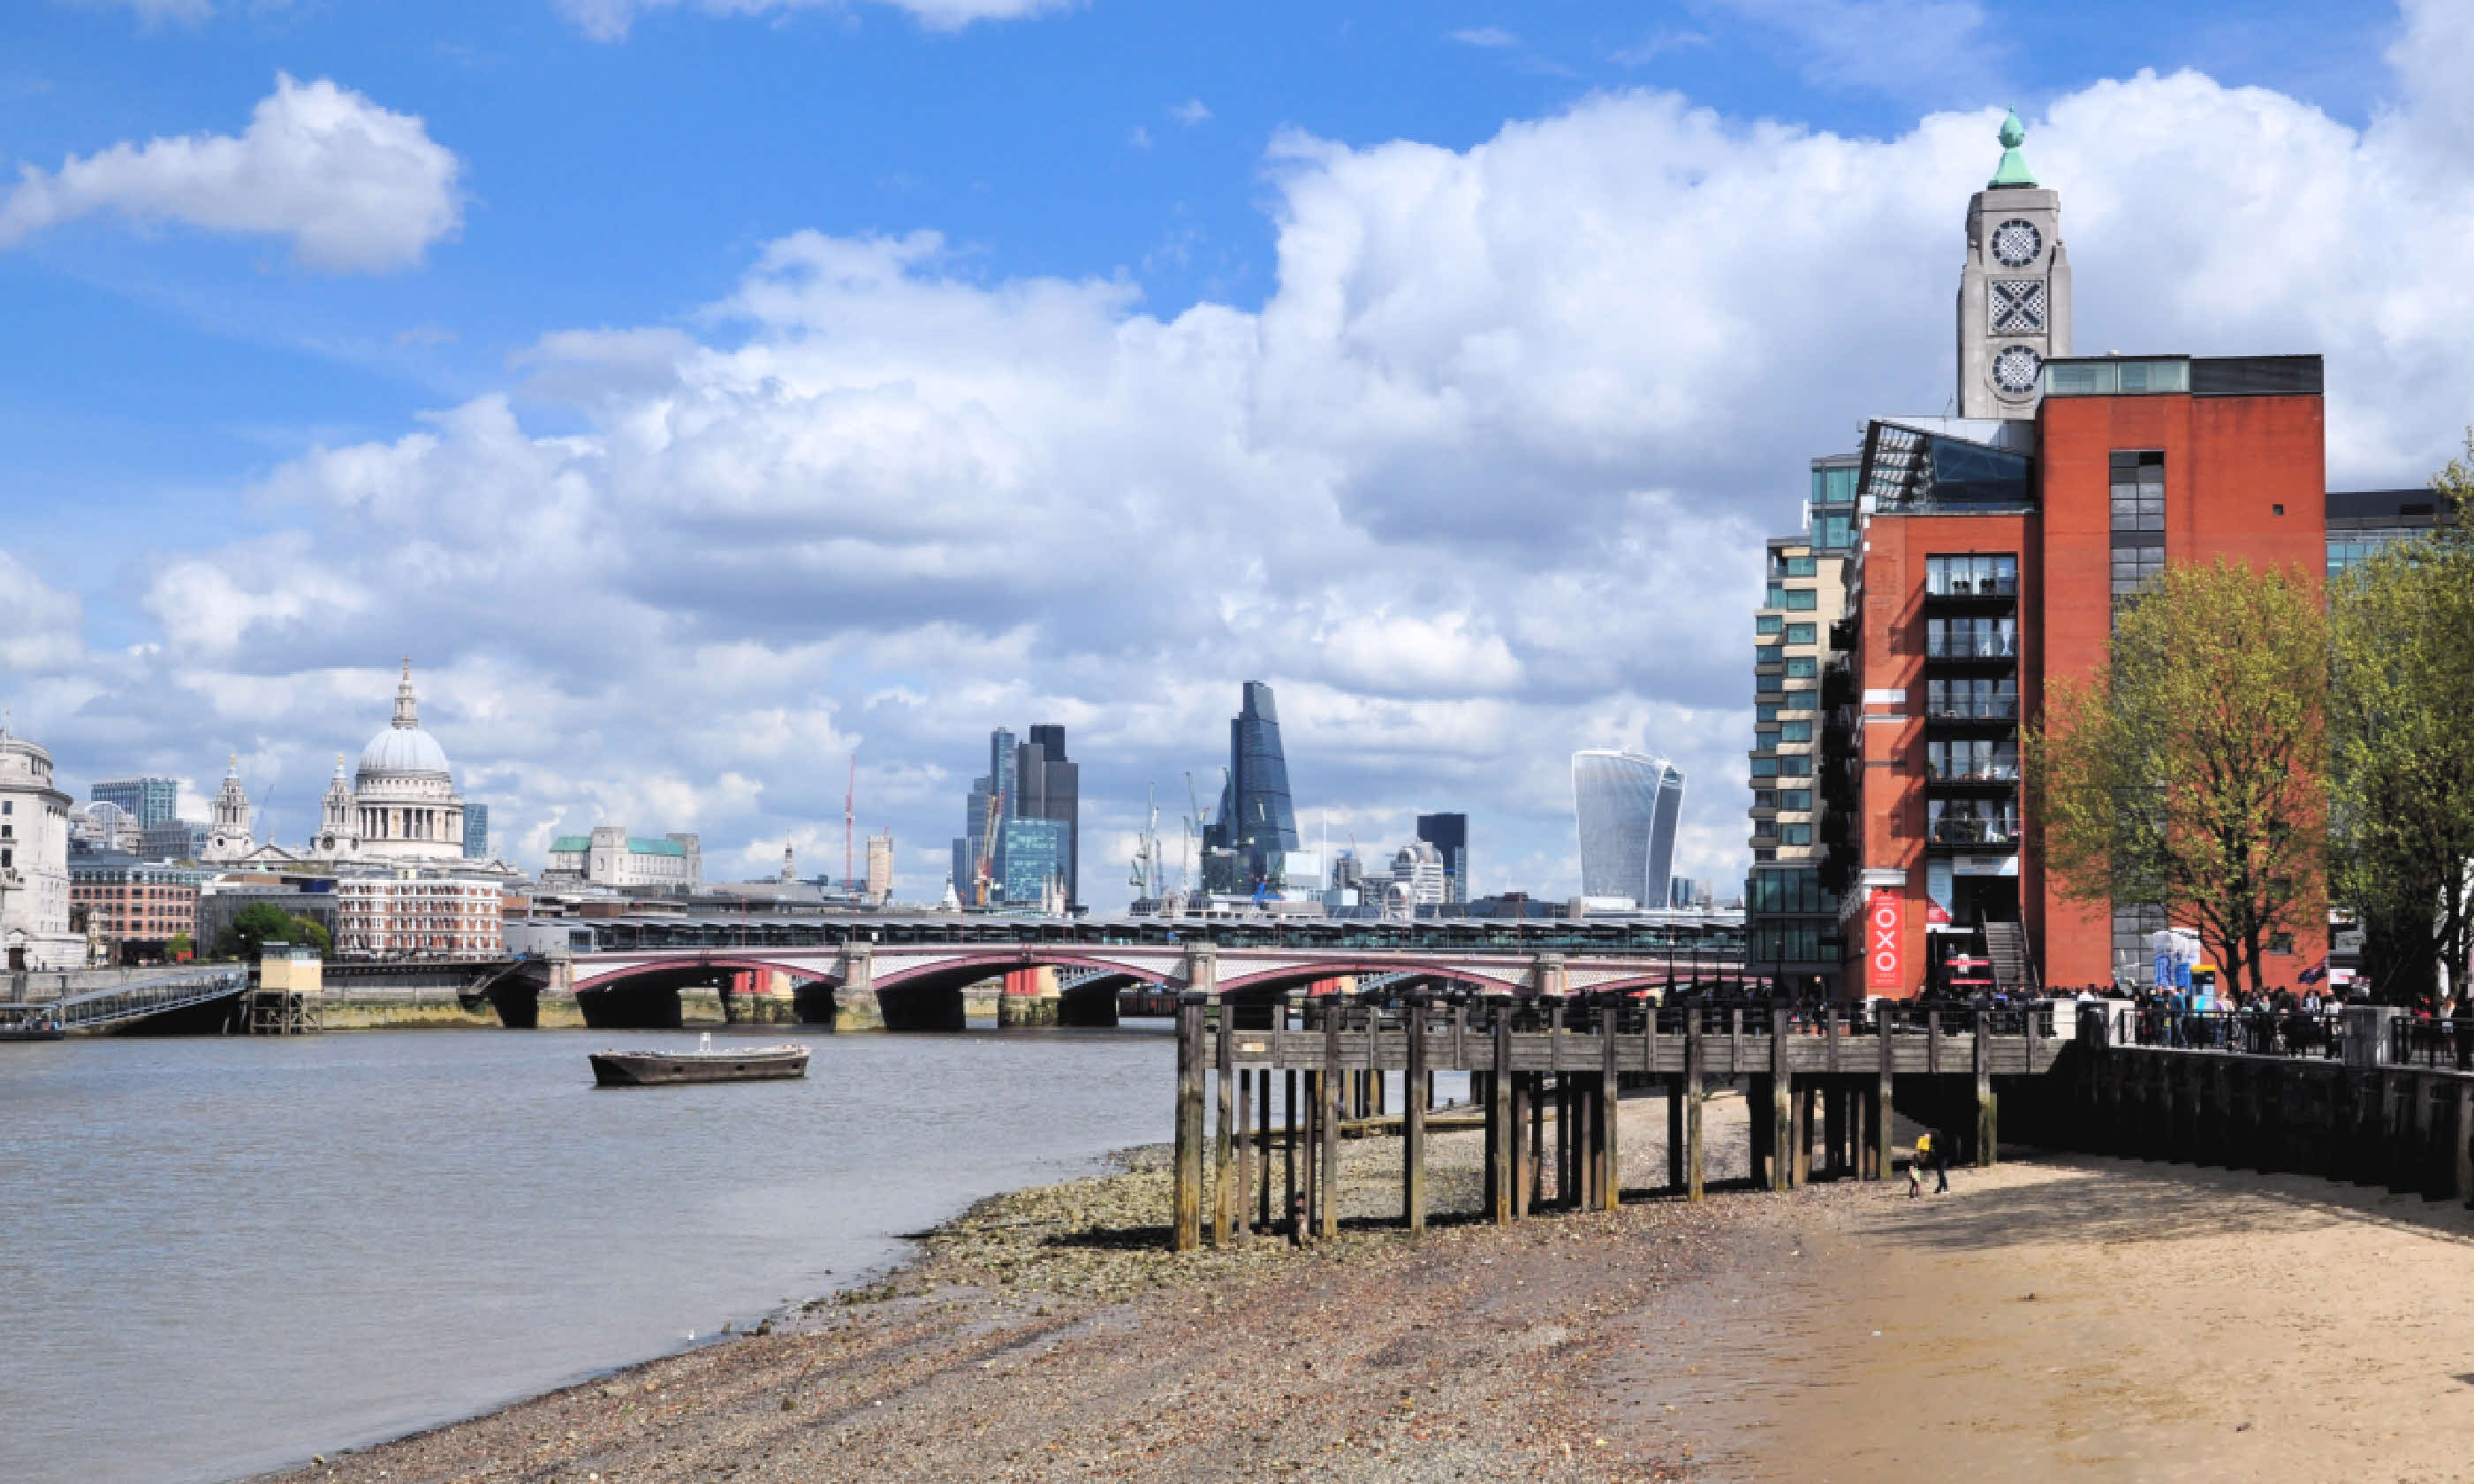 Low tide on the River Thames (Shutterstock)